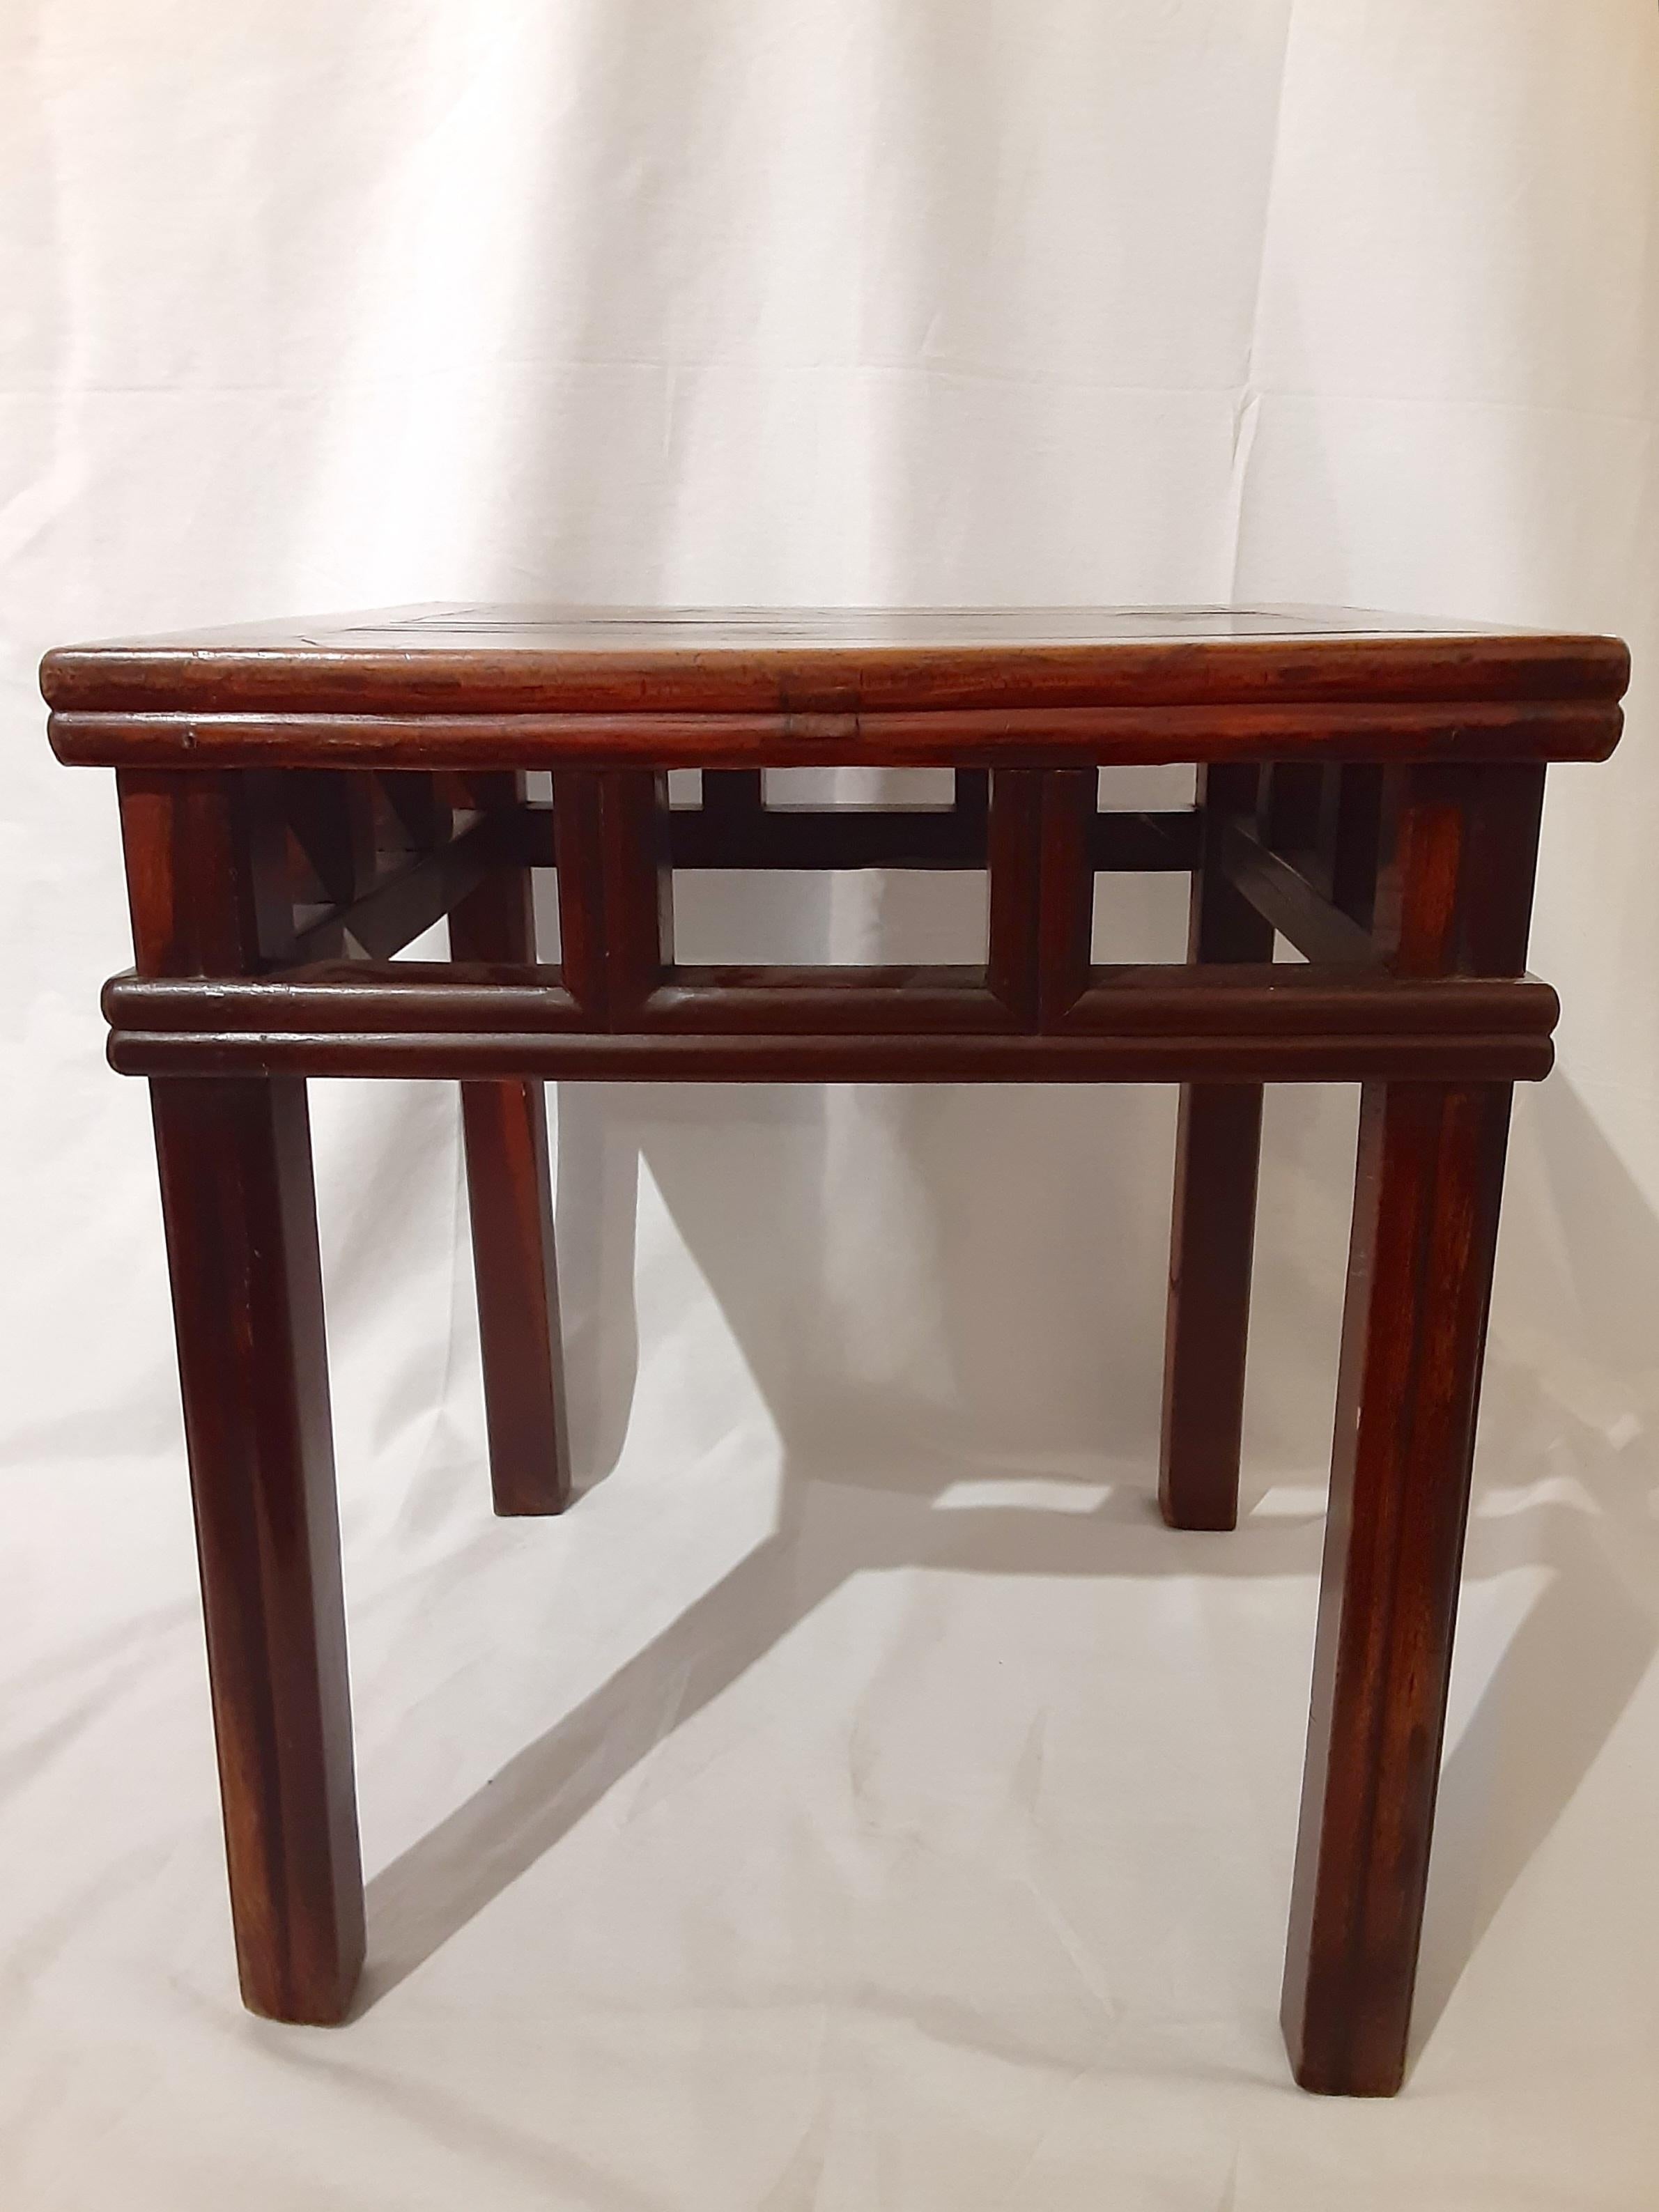 Table d'appoint chinoise

Dimensions : 18